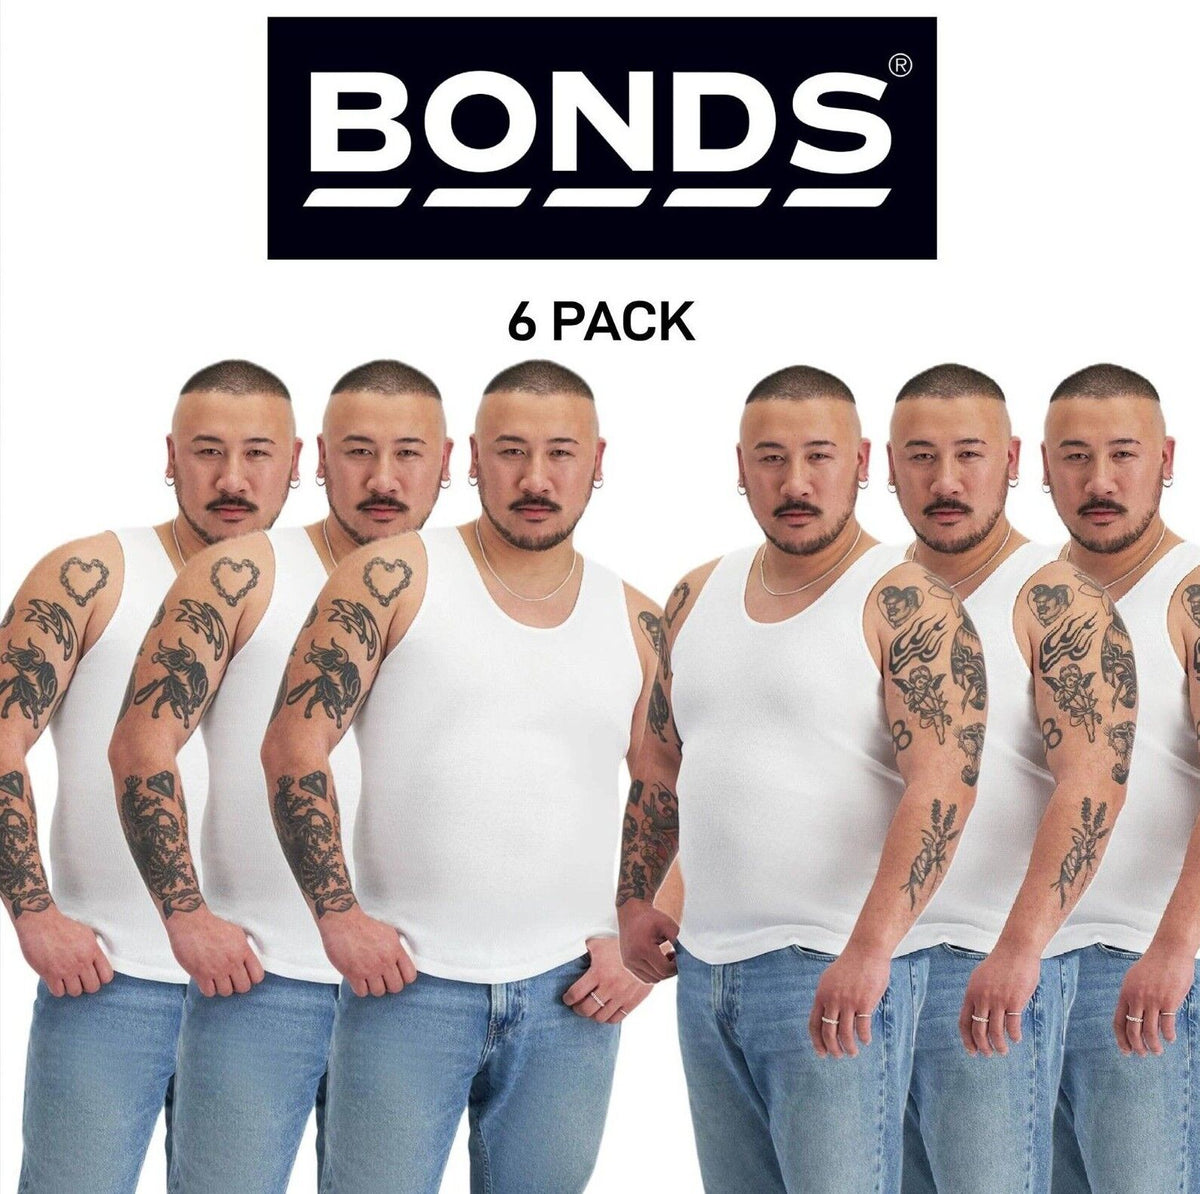 Bonds Mens Chesty Singlets Breathable Comfortable Side Seamfree 6 Pack M7WL